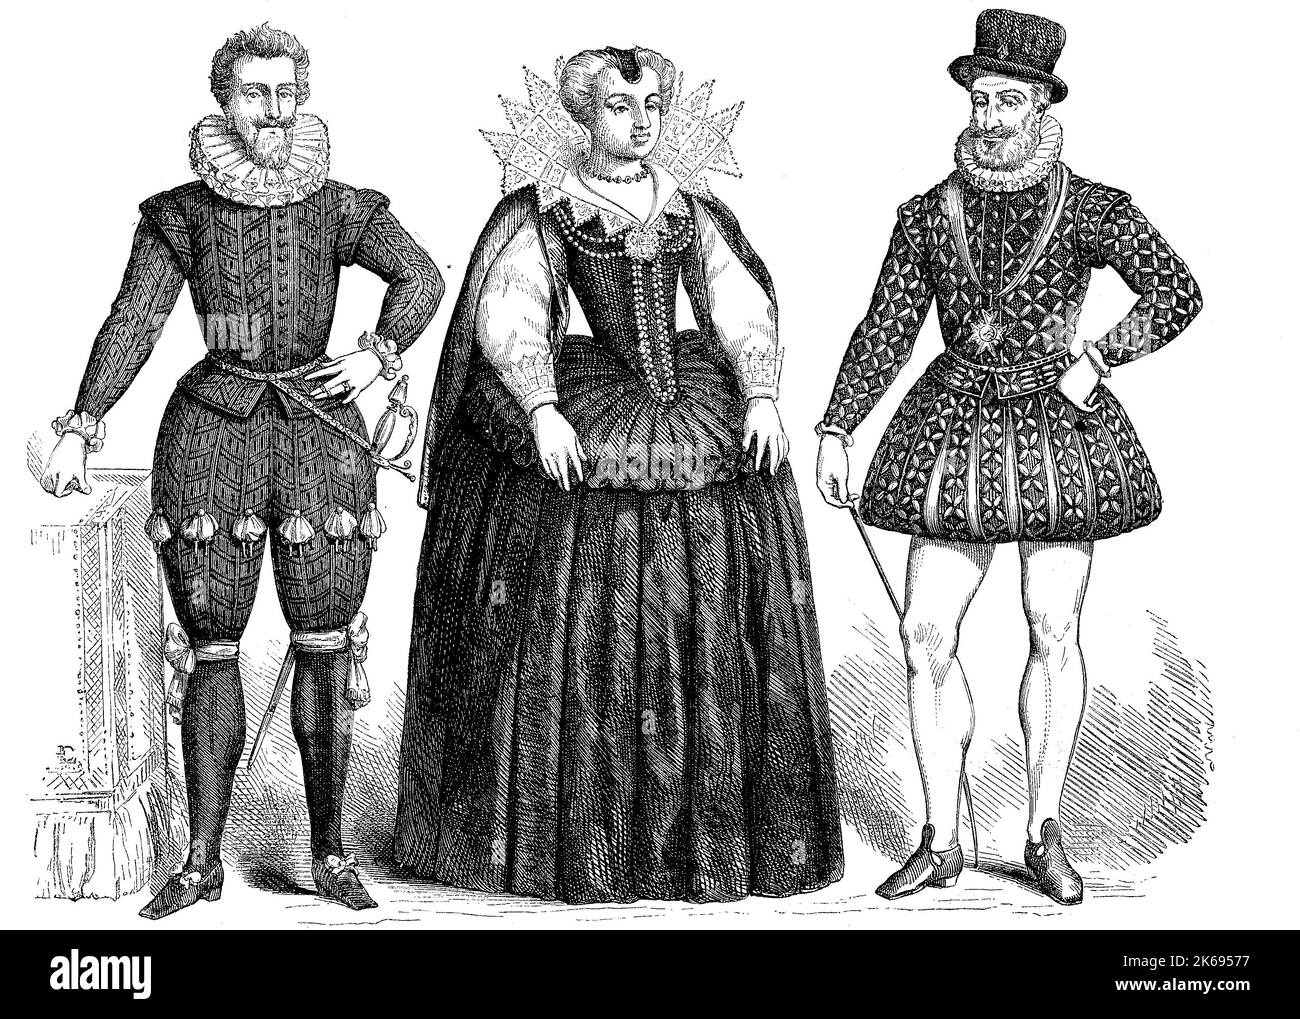 Digital improved reproduction, Fashion in Paris in 1600, Antoine de Saint-Chamond, Signer de Mery, an unknown lady and Henrie IV, original woodprint from th 19th century Stock Photo